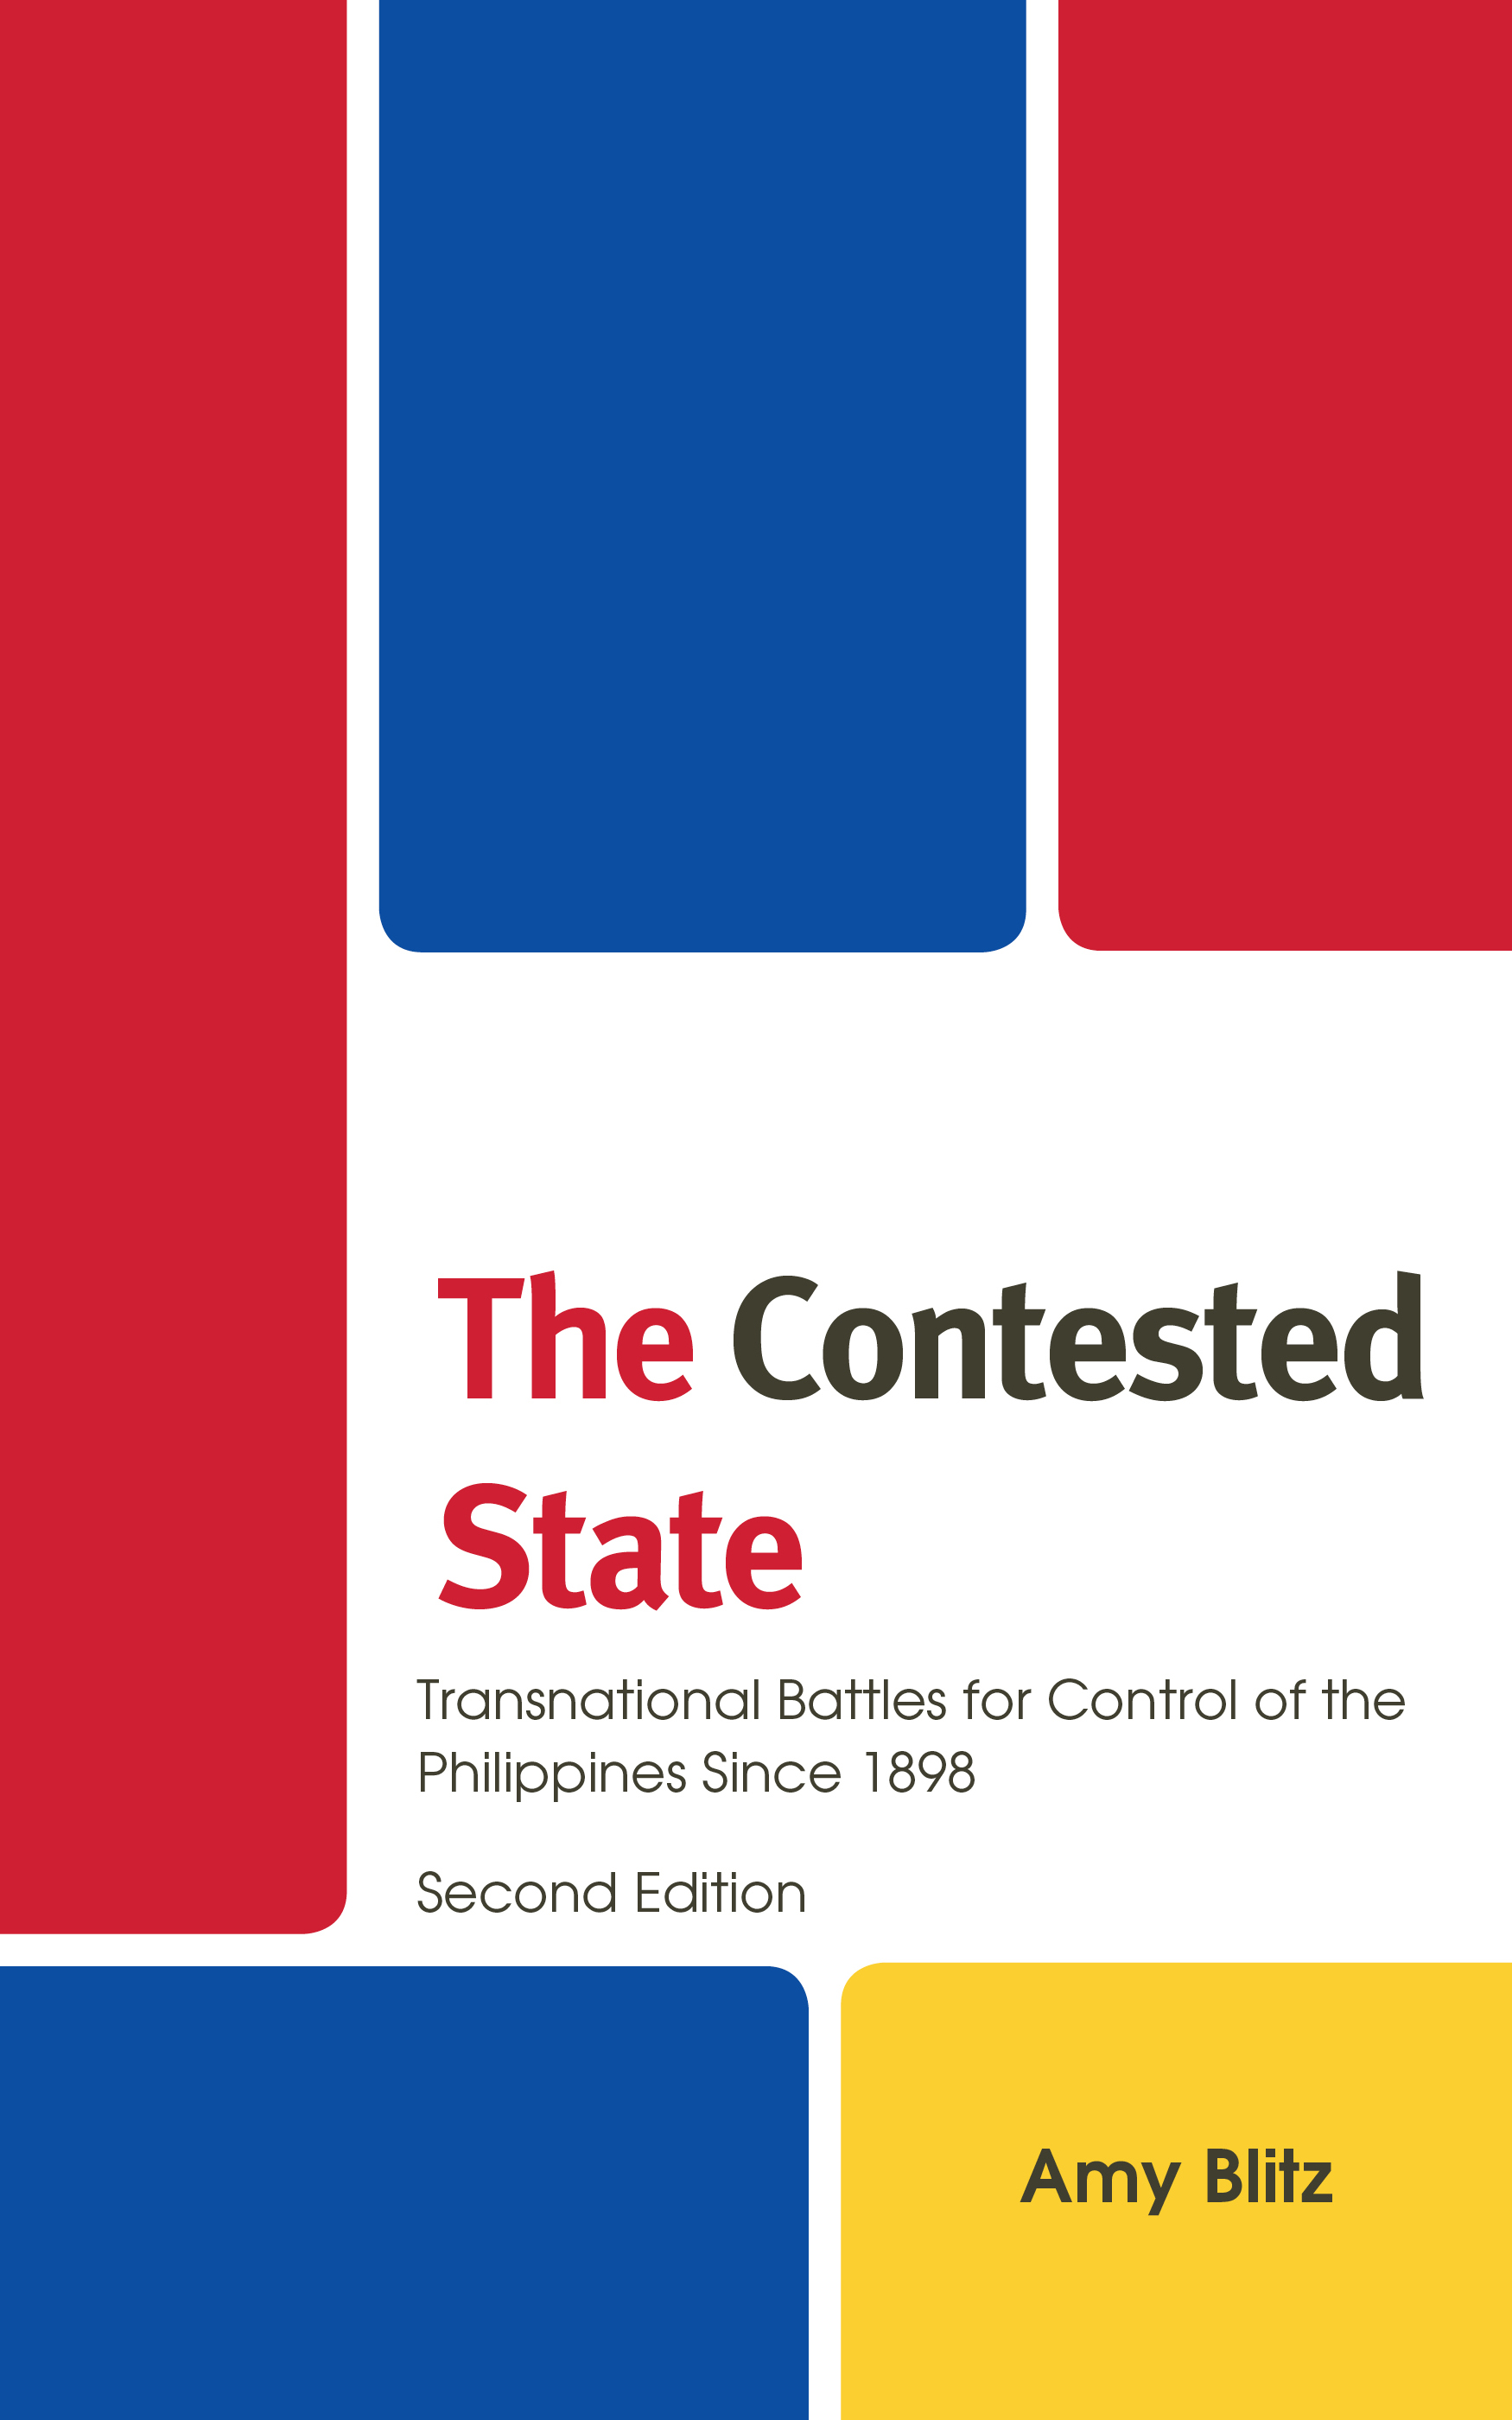 The Contested State: Transnational Battles for Control of the Philippines Since 1898